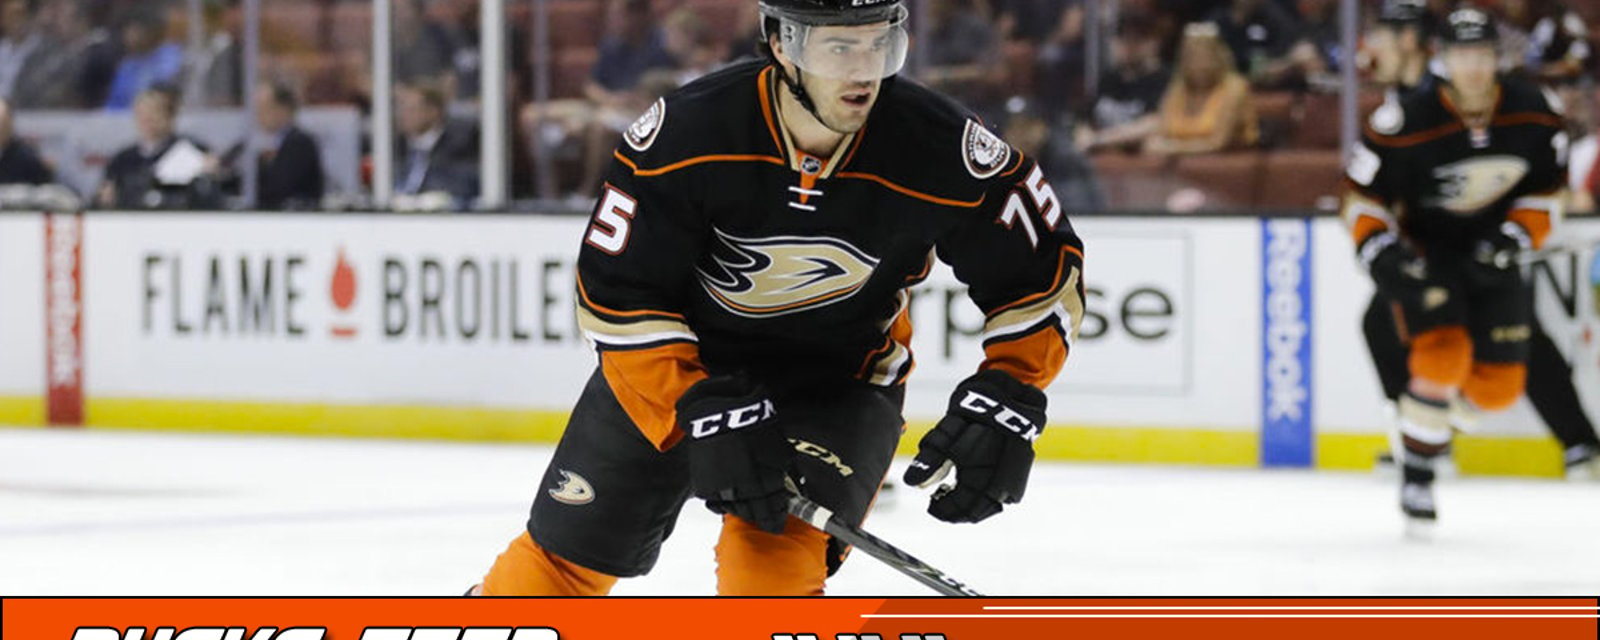 Breaking: Ducks young defenseman assigned to the AHL